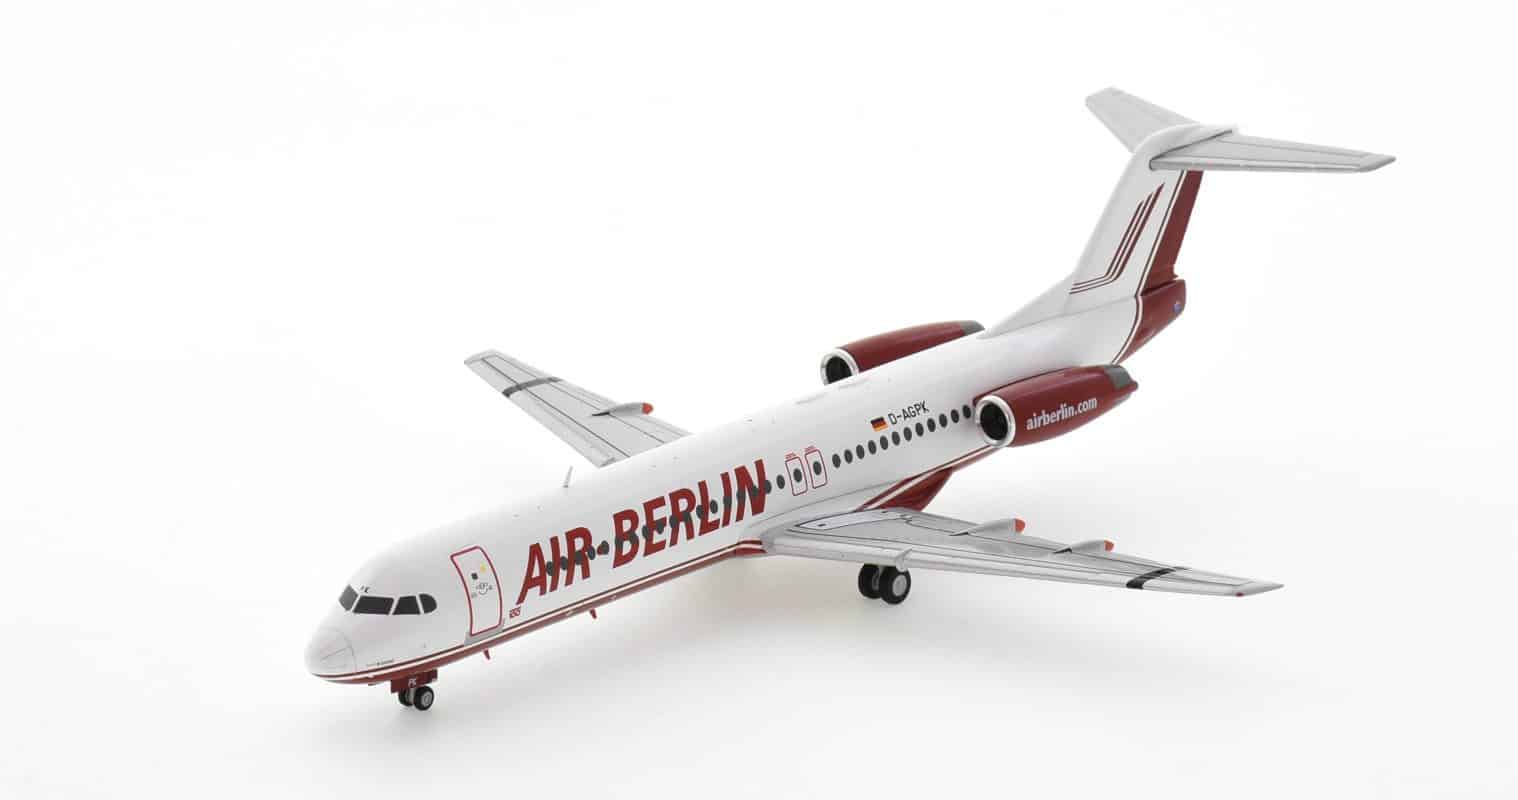 Front port side view of Herpa Wings HE571203 - 1/200 scale diecast model Fokker 100 (F28 Mark 0100), registration D-AGPK, in Air Berlin's livery.